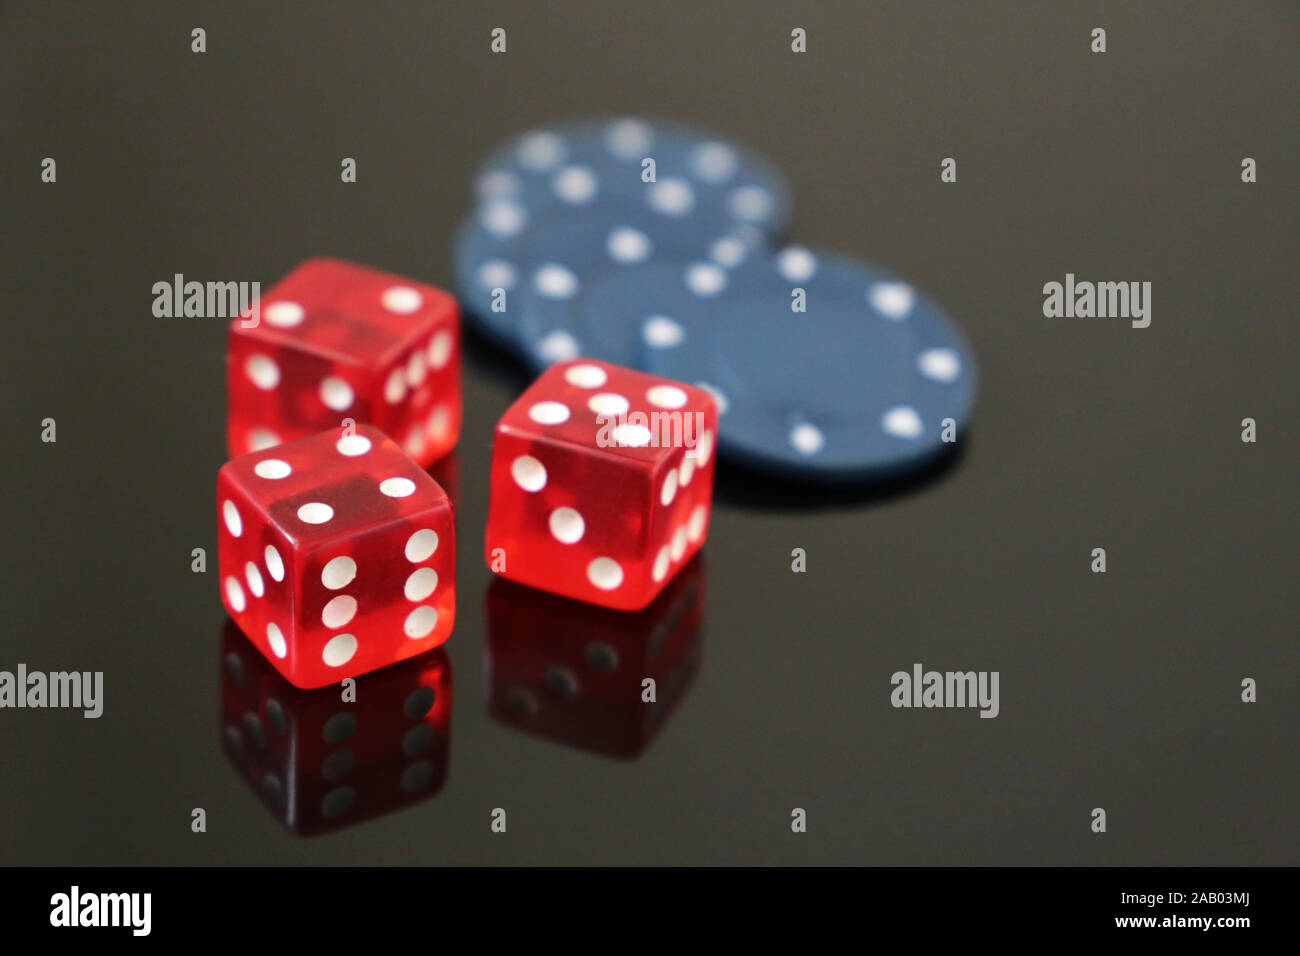 Red dice and casino gaming chips on dark mirrored table. Background for casino games, gambling, luck or randomness Stock Photo